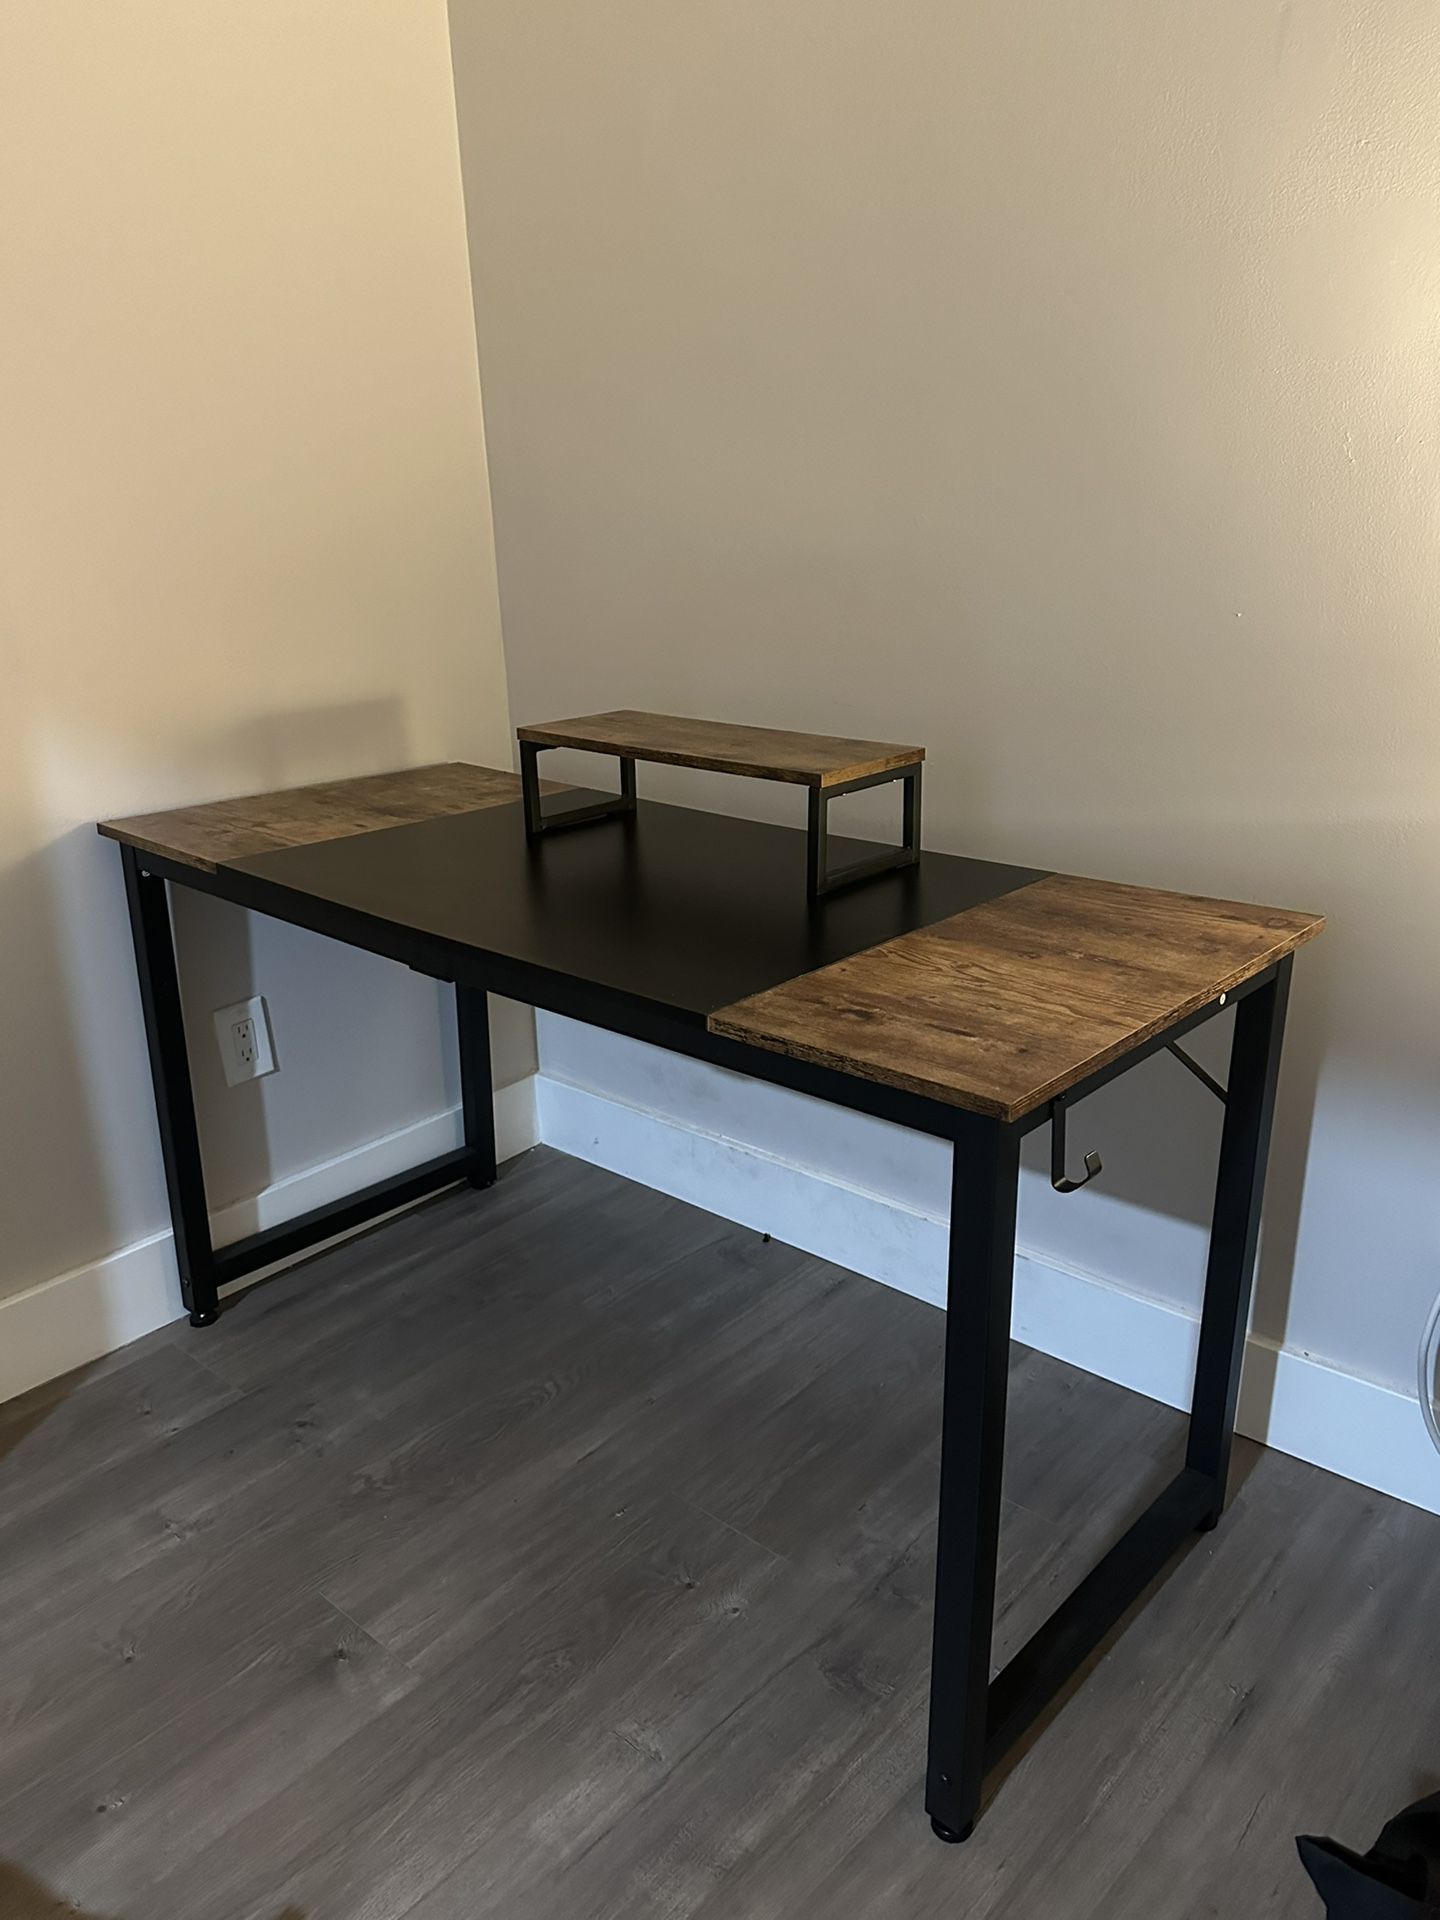 Modern Metal Desk With Wood Accent Top - Must Go Fast!! $50 Or Obo 